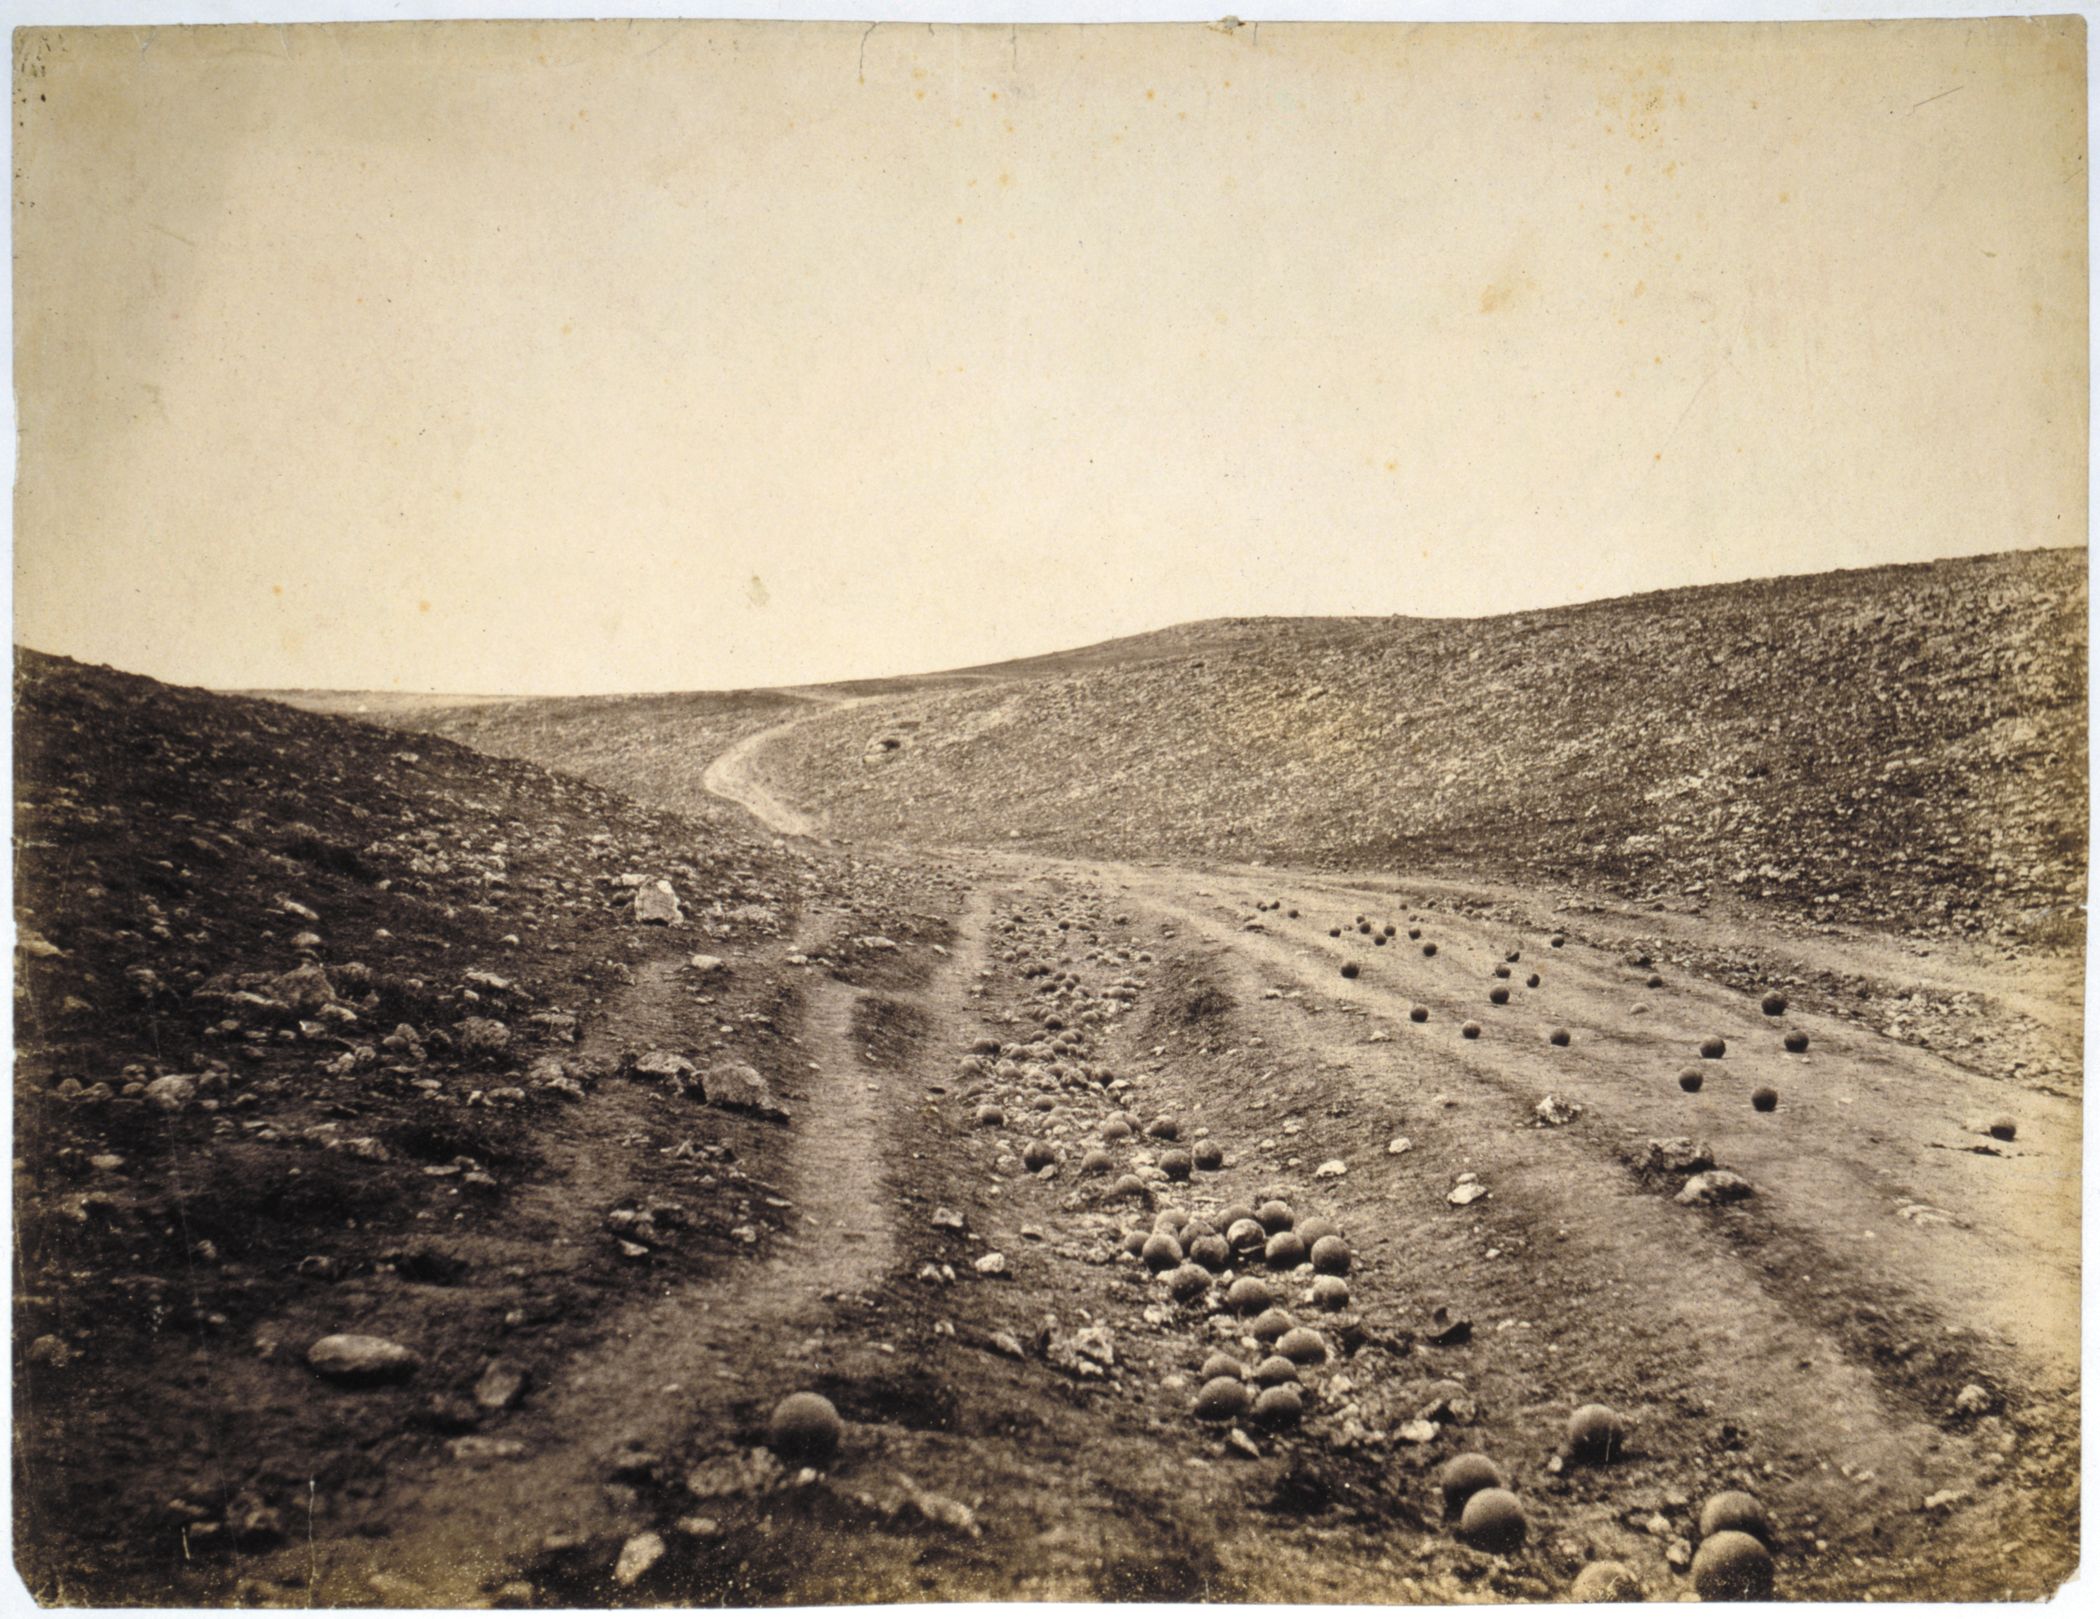 Roger Fenton’s photograph of a Crimean gulley littered with Russian cannonballs was misidentified as the site of the Charge of the Light Brigade. 